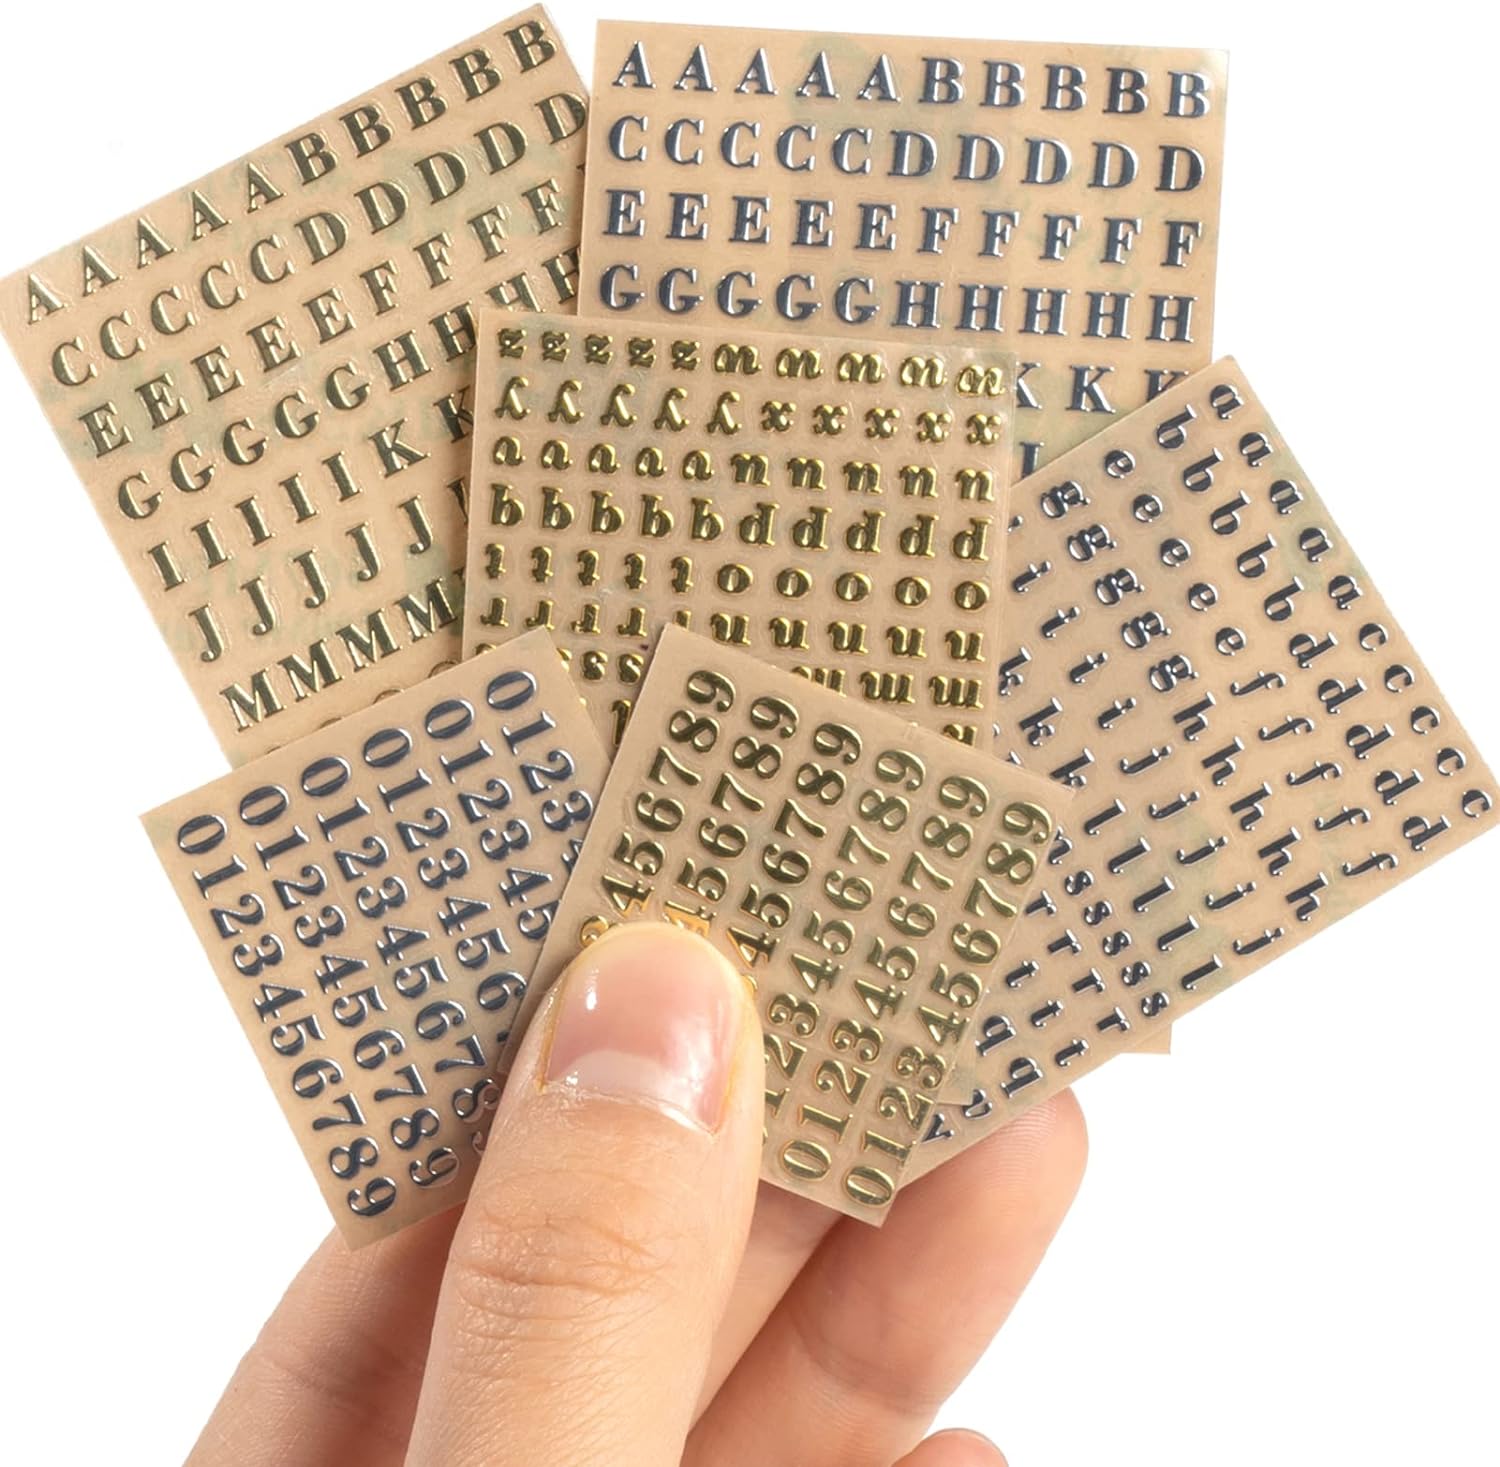 3mm Alphabet Number Stickers Self Adhesive 6 Sheets